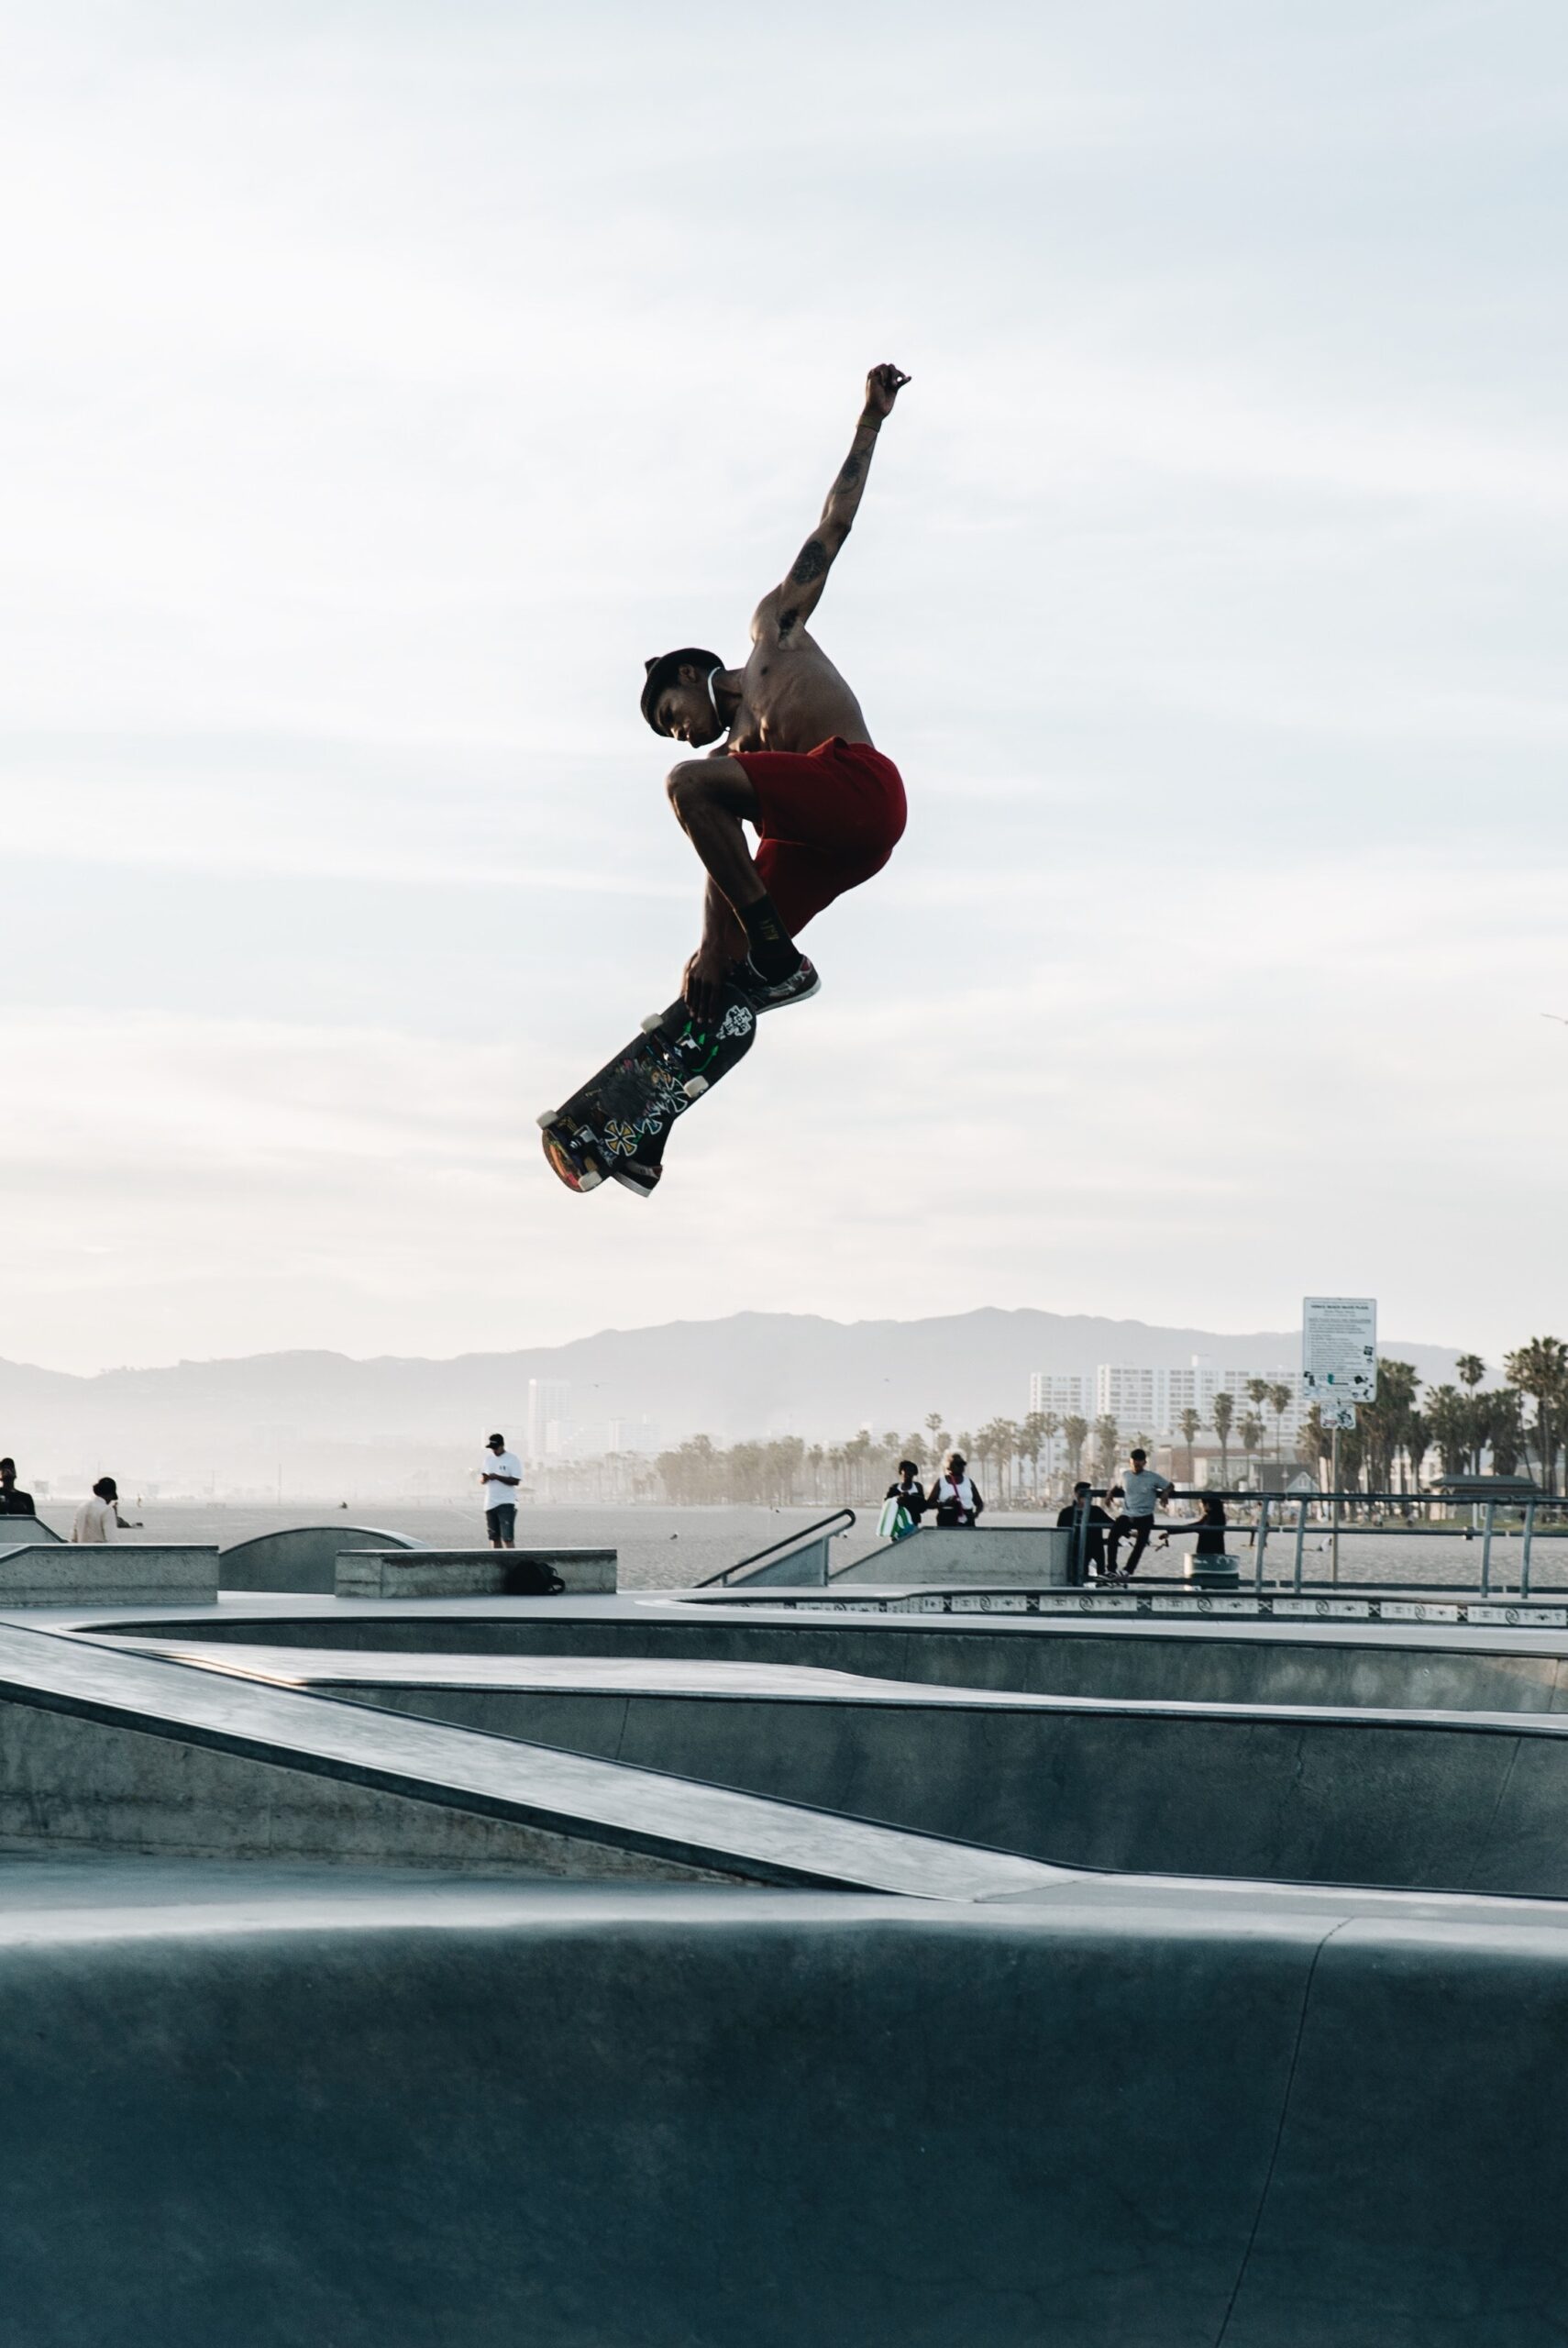 How Do You Adapt To Changing Skateboarding Trends And New Tricks?